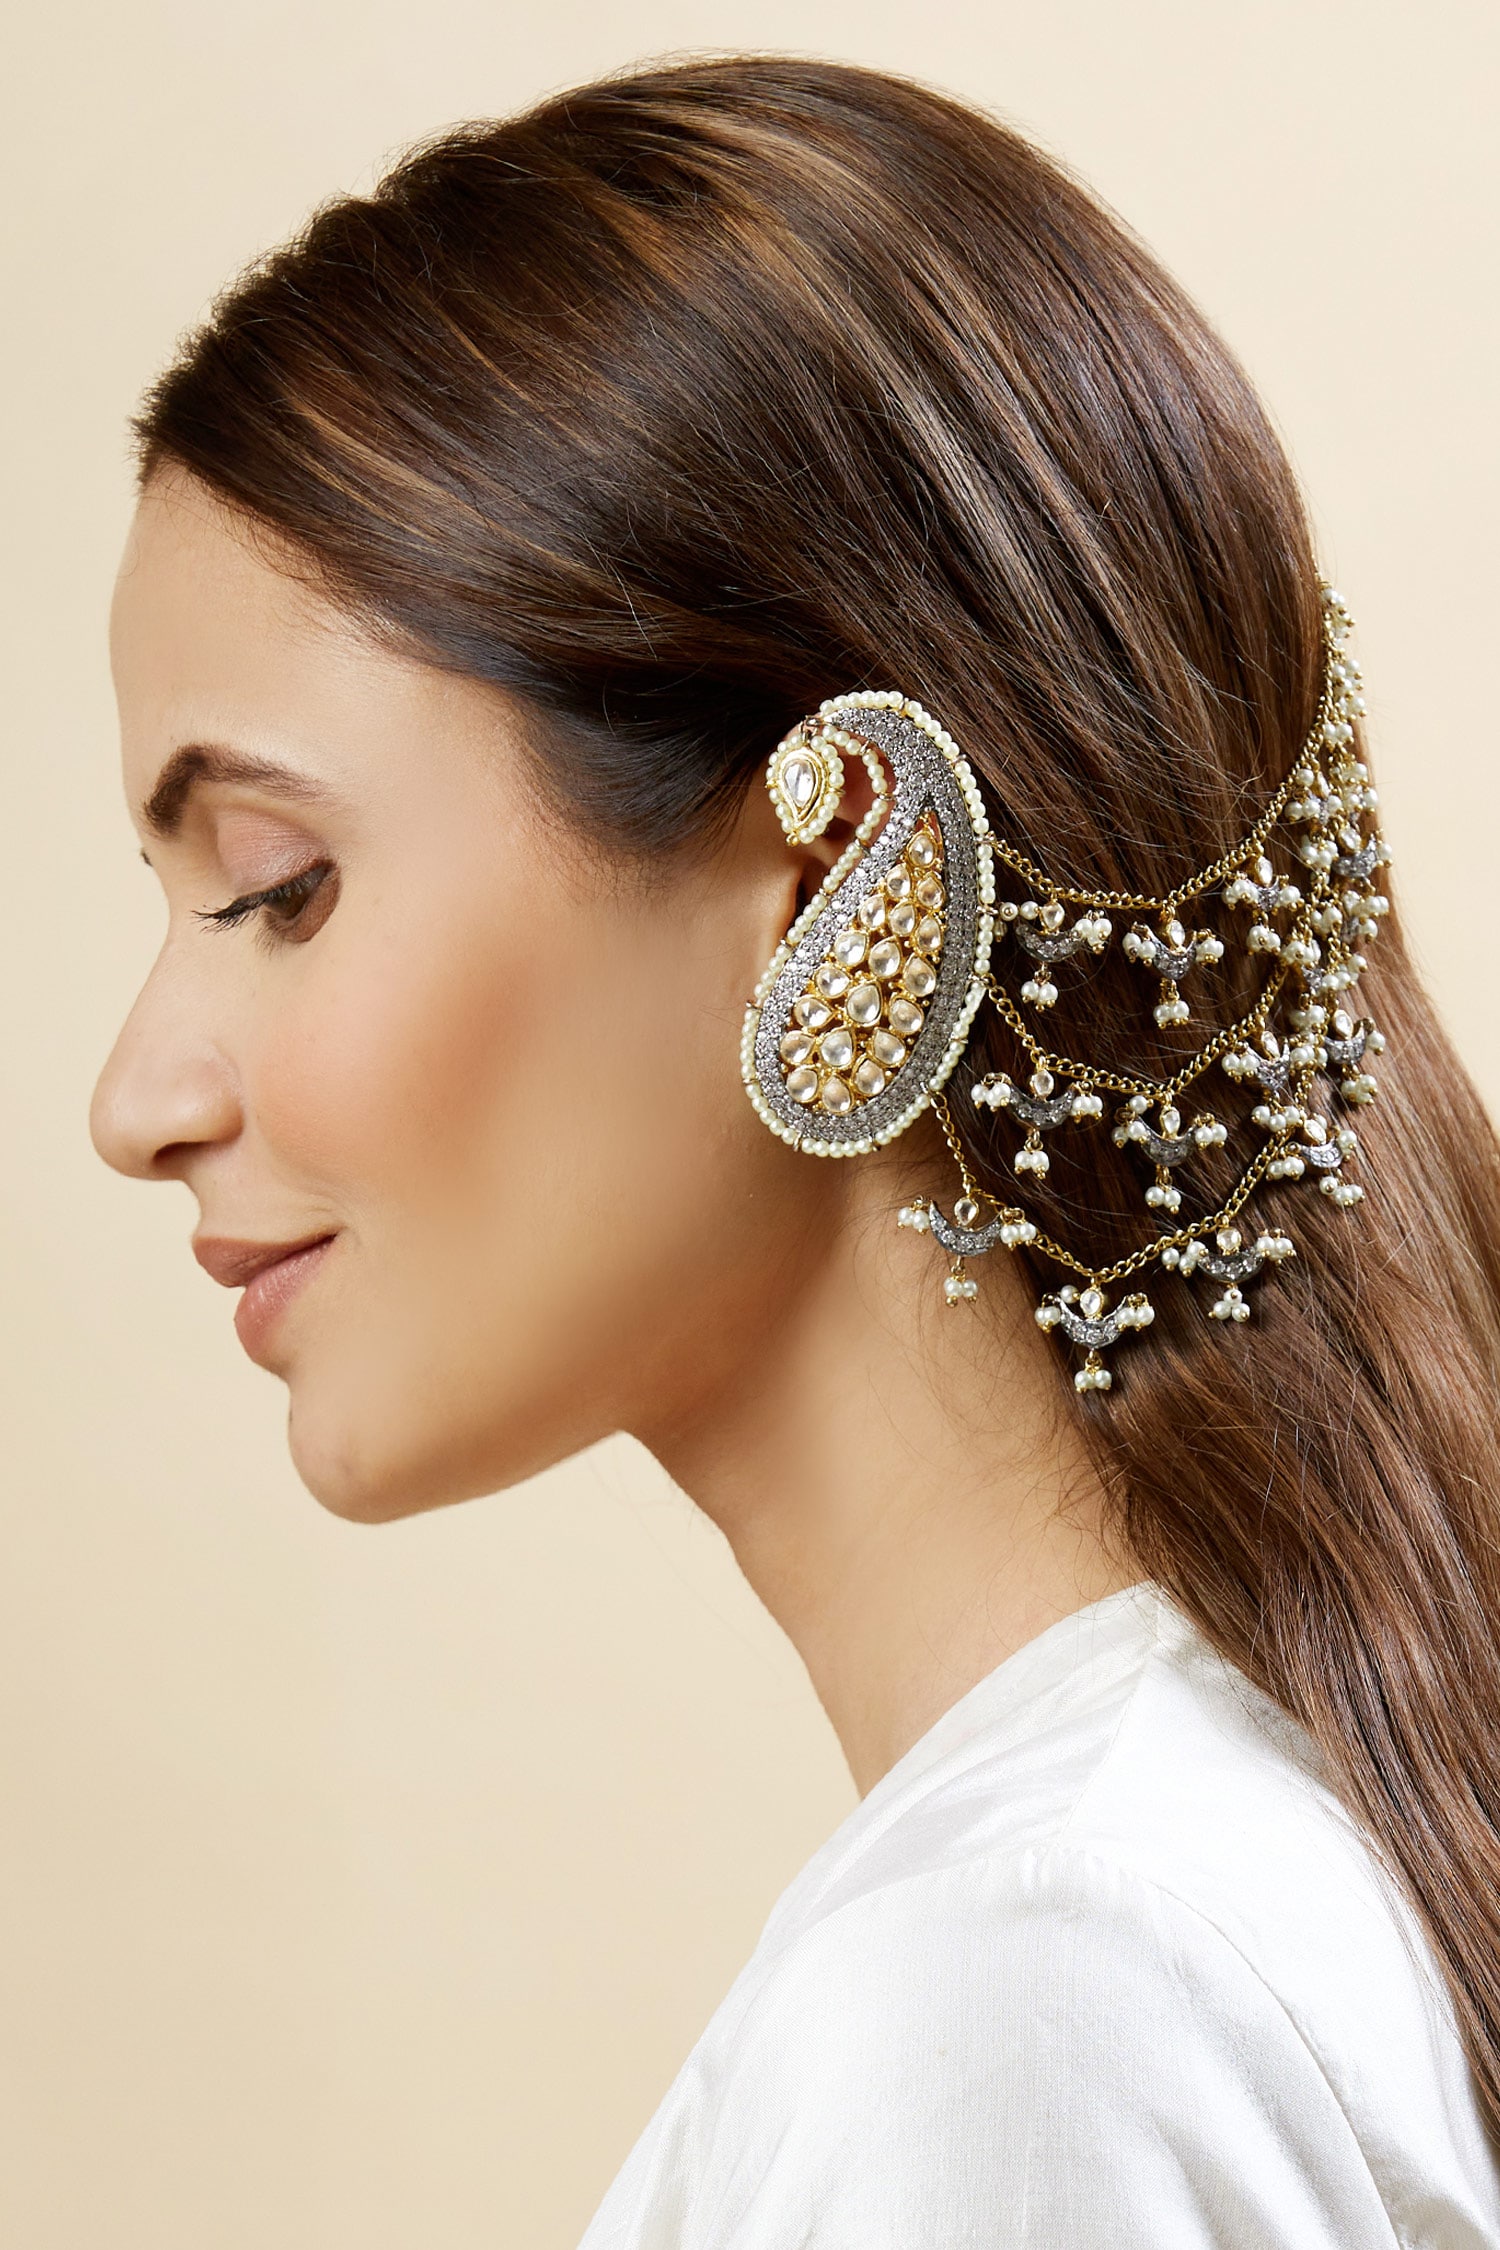 CUFF EARRINGS WITH PARTY WEAR SAREE
HOW TO STYLE SAREE WITH JEWELLERY